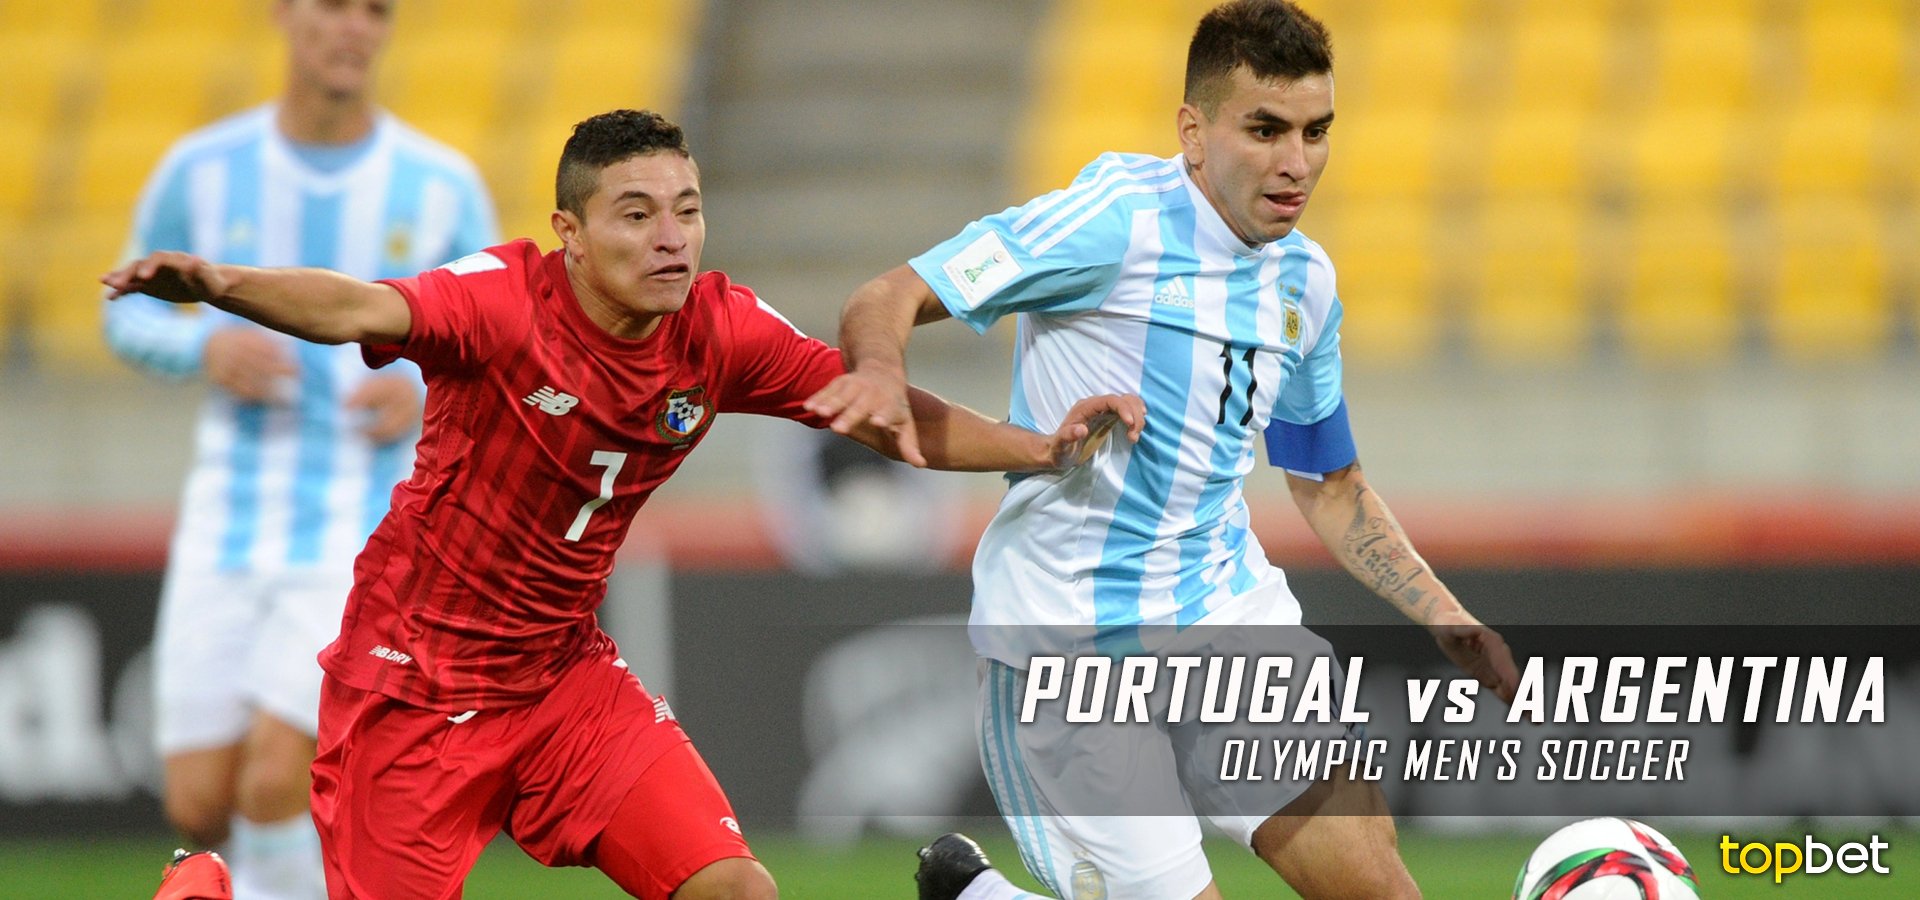 Portugal vs Argentina 2016 Olympics Group D Predictions/Odds